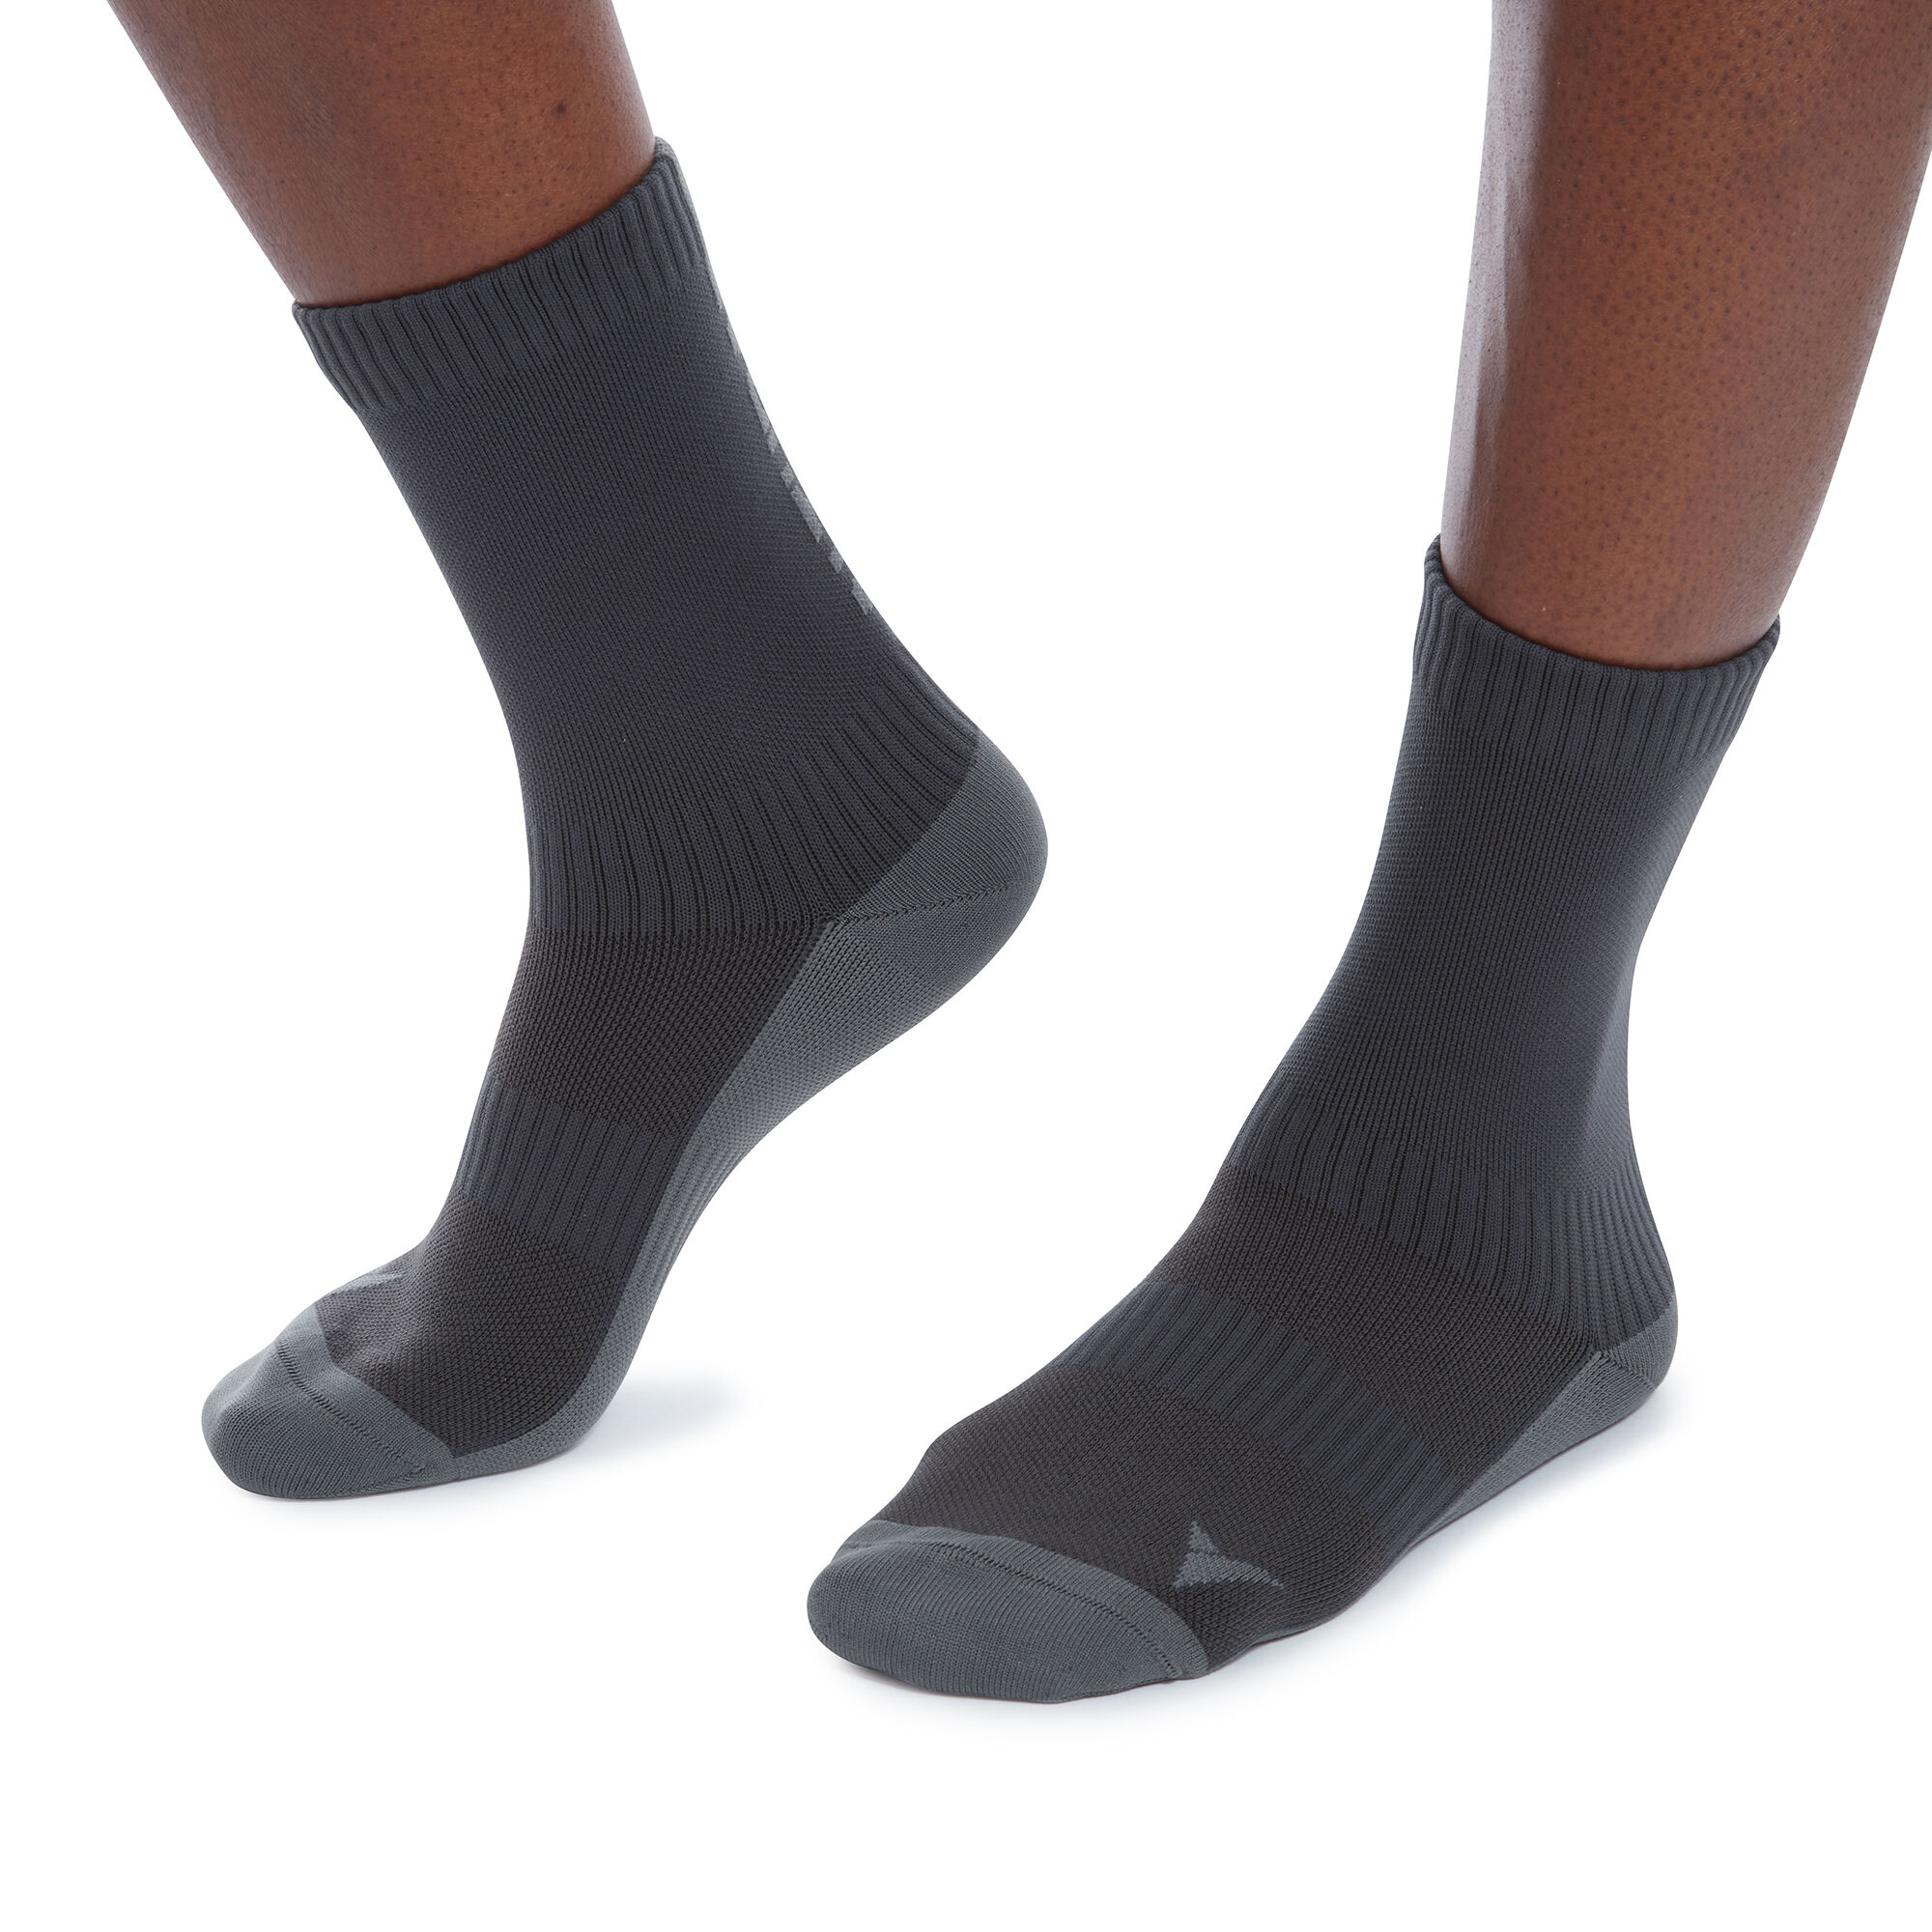 Altura Chaussettes Impermeables - Calcetines ciclismo